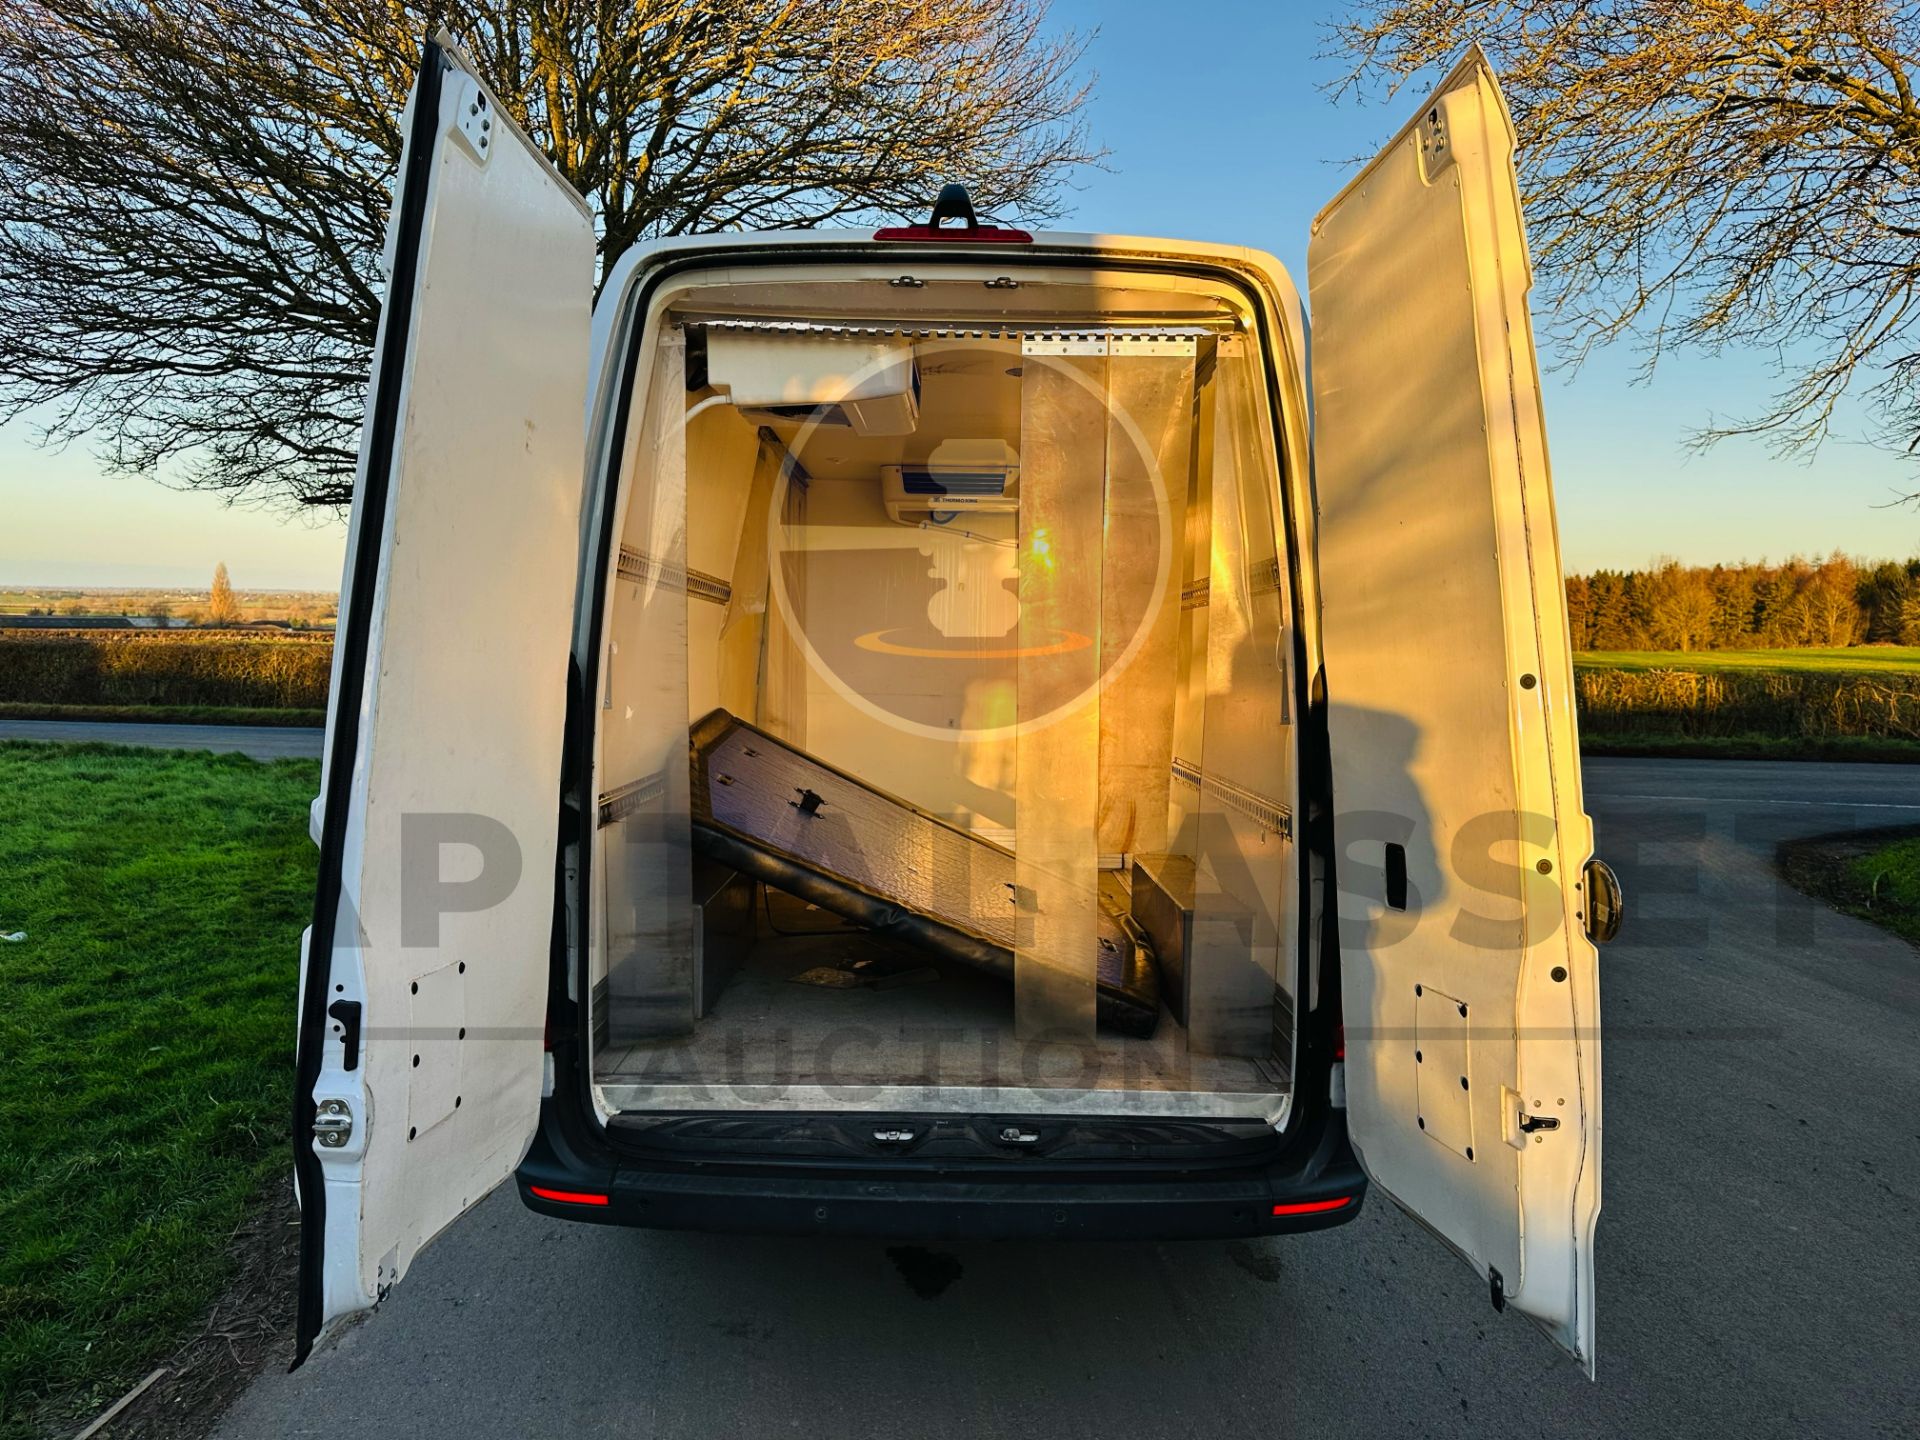 MERCEDES-BENZ SPRINTER 314 CDI *MWB - REFRIGERATED VAN* (2019 - FACELIFT MODEL) *OVERNIGHT STANDBY* - Image 11 of 32